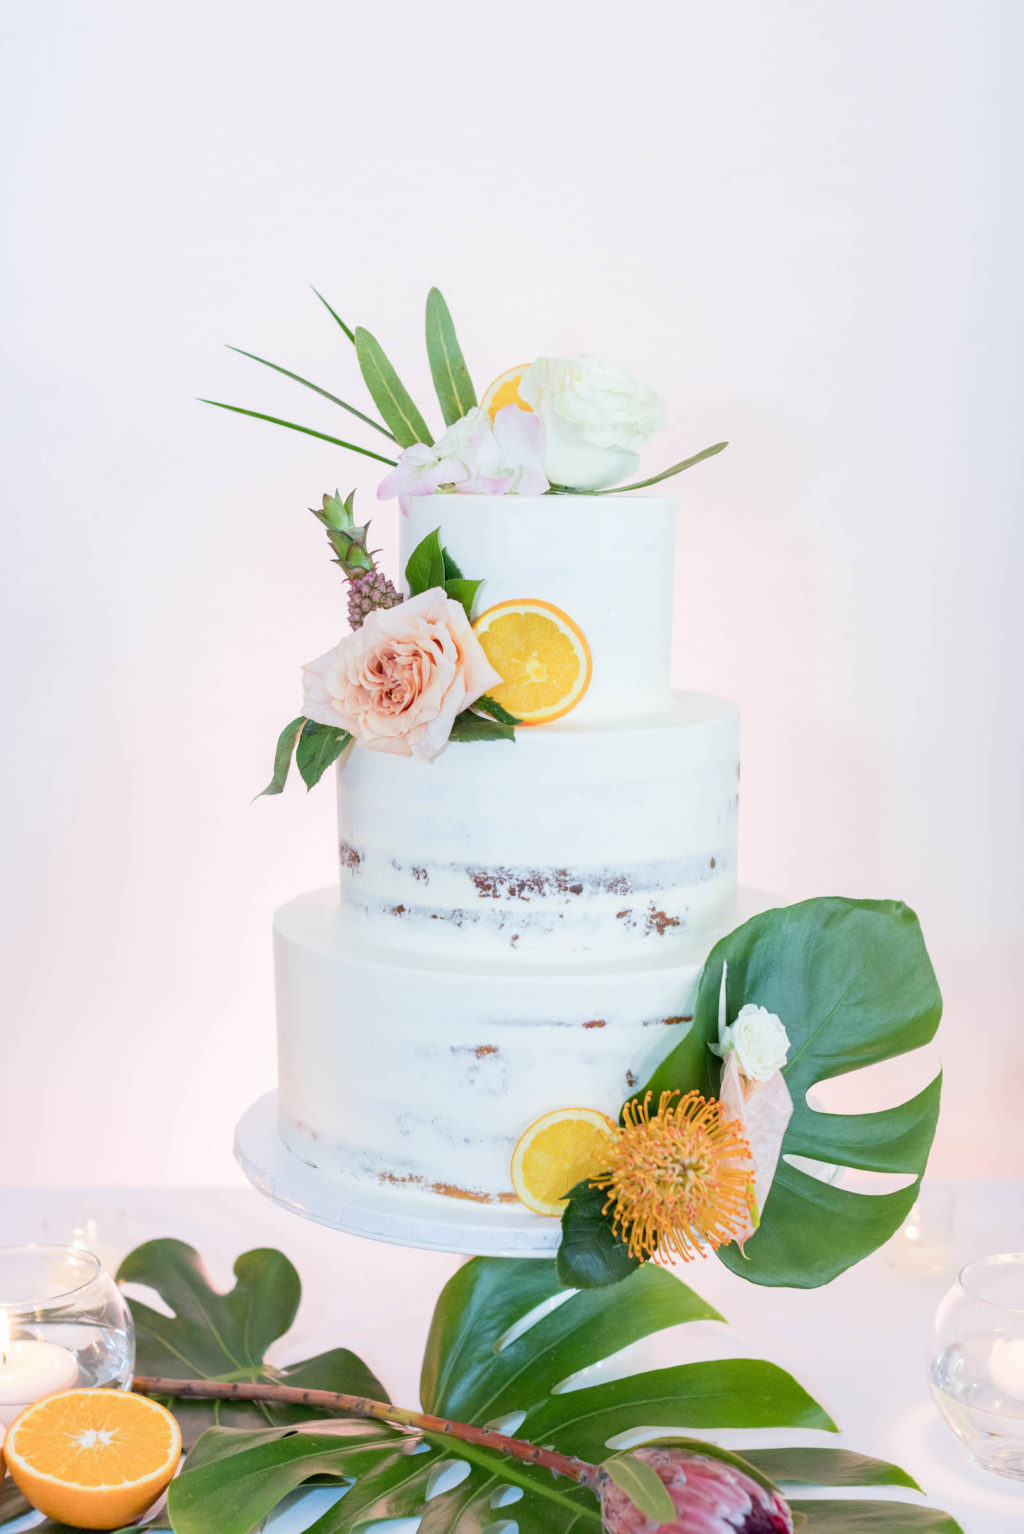 Tropical Beach Wedding Cake | Three Tier Semi Naked Half Iced Buttercream Wedding Cake with Tropical Greenery Monstera Leaf, Orange Slices and Mini Ornamental Pineapple, Blush Pink Roses and Protea by The Artistic Whisk